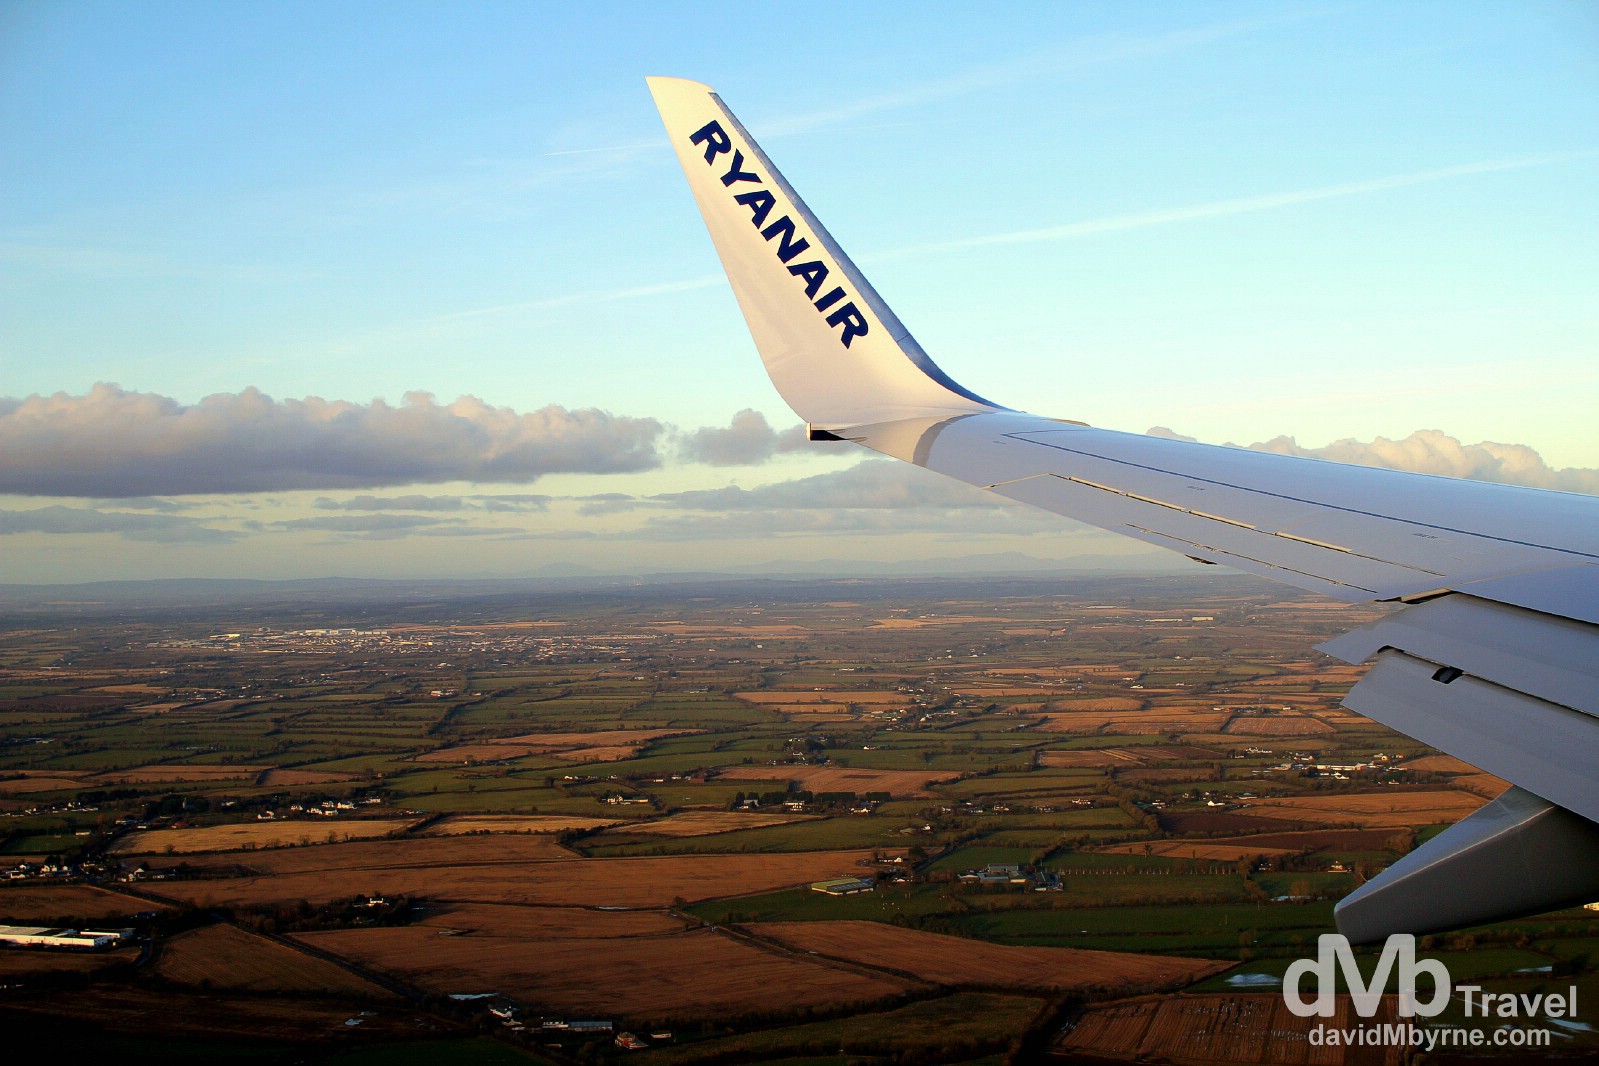 The Irish countryside as seen from Ryanair flight 115 approaching Dublin Airport. My first glimpse of home in over a year. December 10th 2012. 